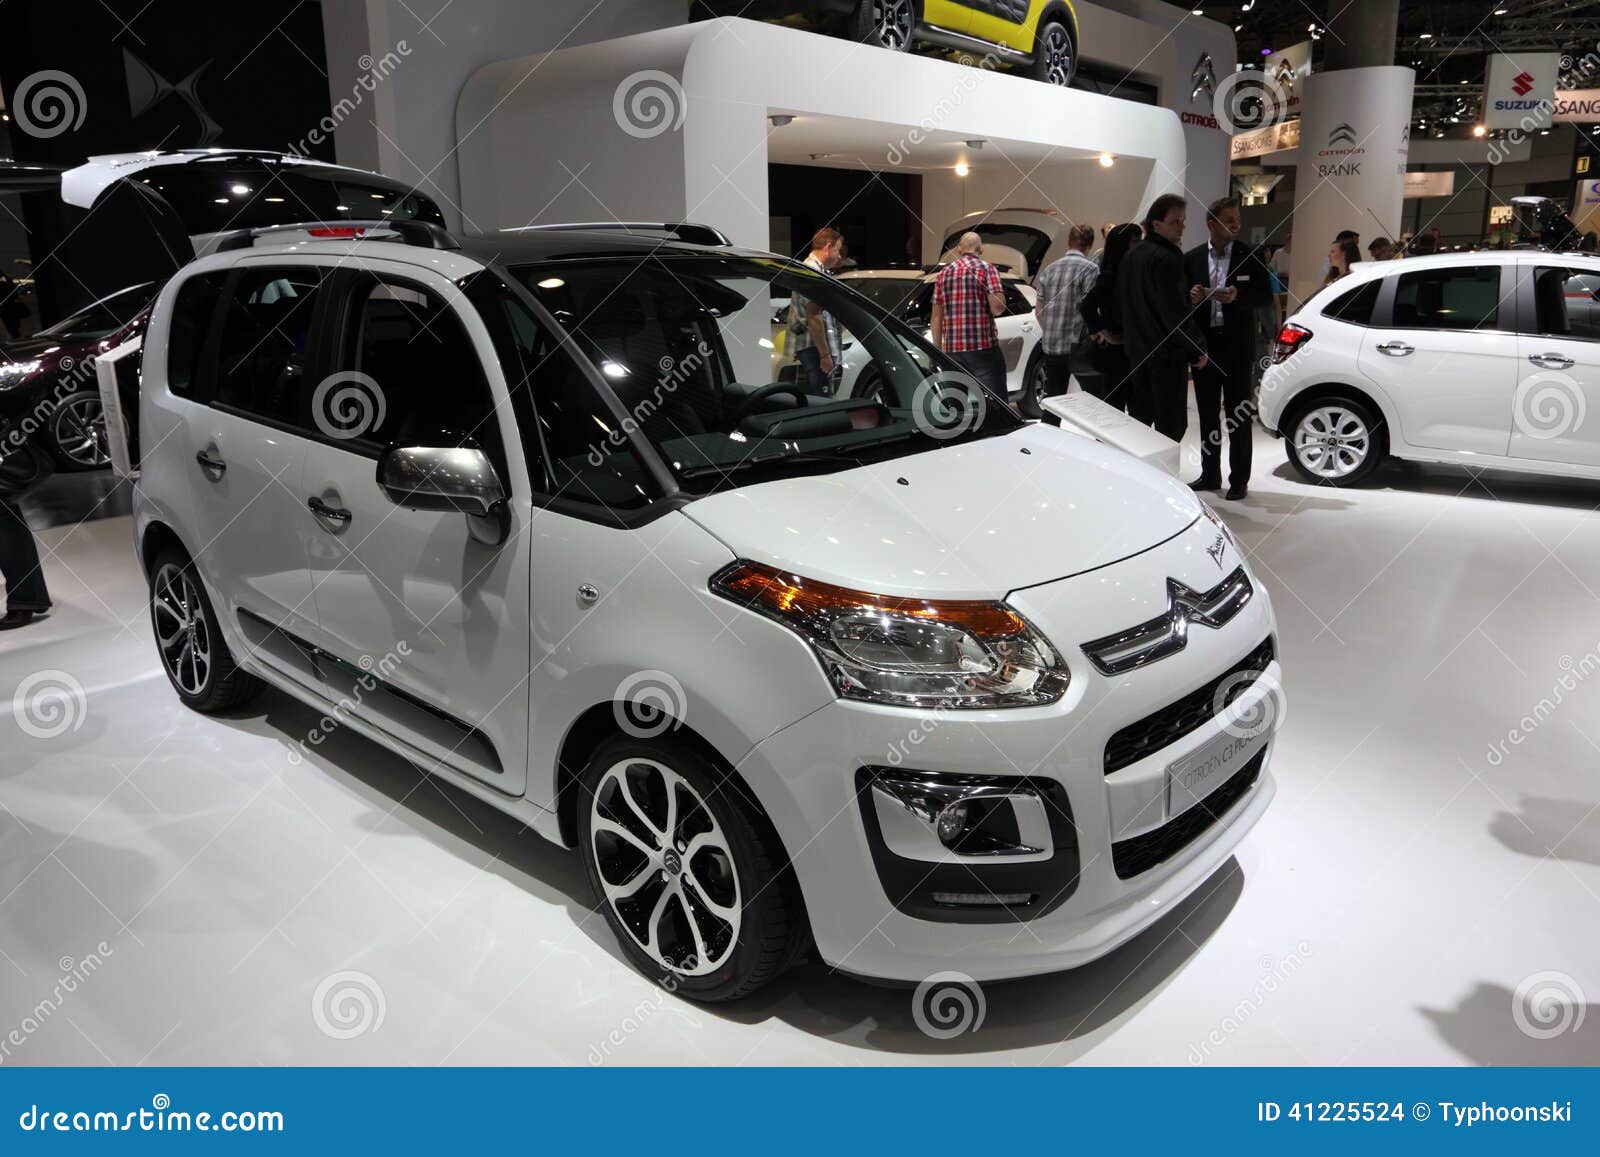 Citroen C3 Picasso at the Auto Mobile International Editorial Stock Image -  Image of french, auto: 41225524